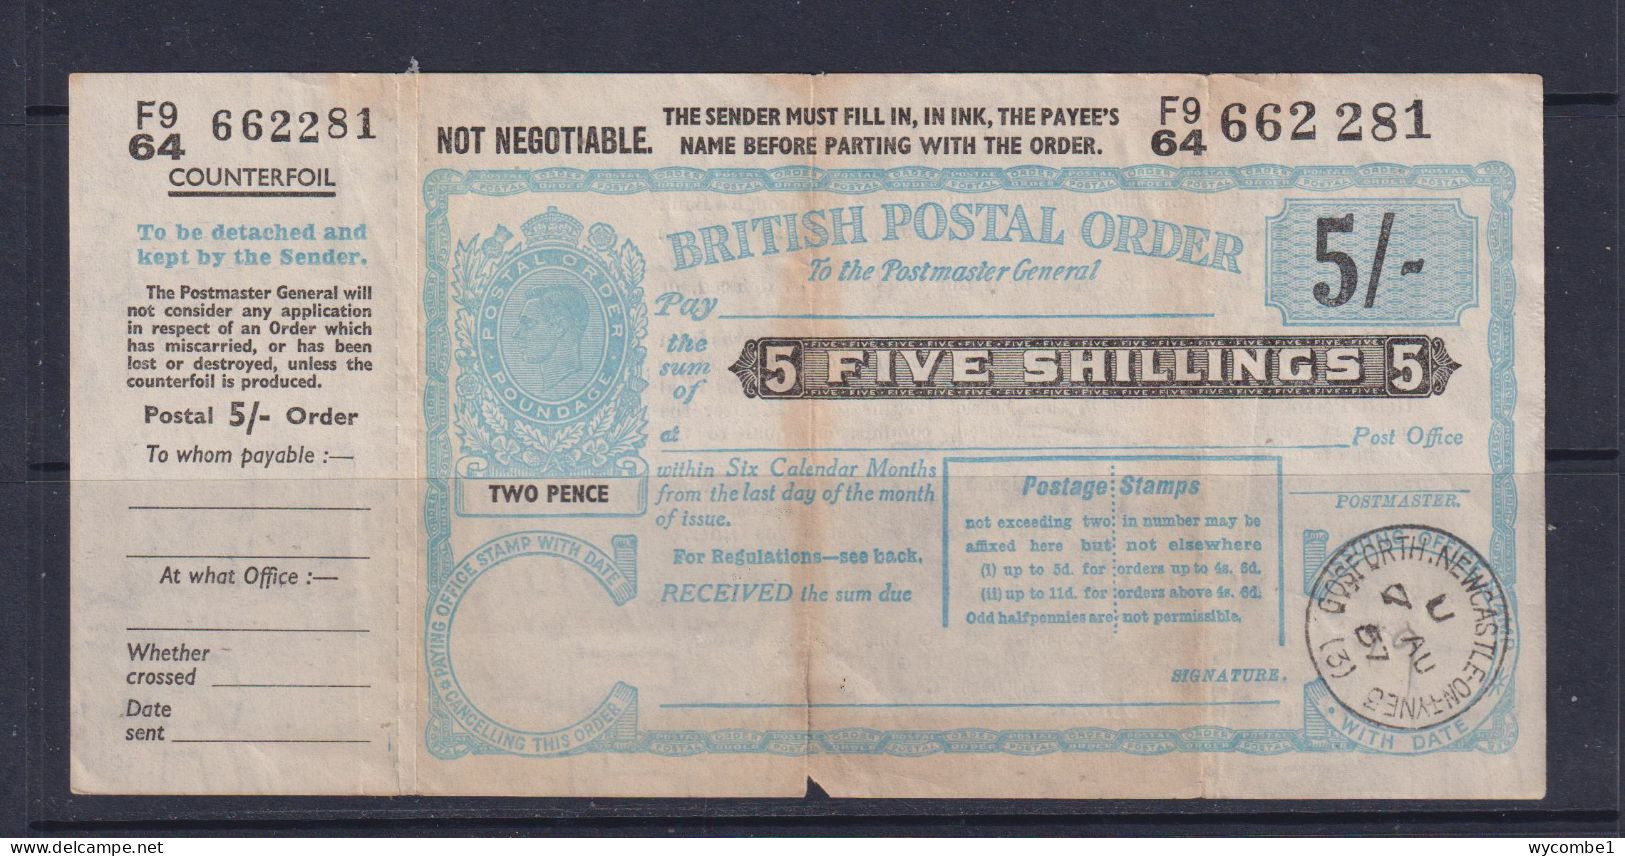 GREAT BRITAIN - 1957 (George VI) 5 Shilling Postal Order - Cheques En Traveller's Cheques